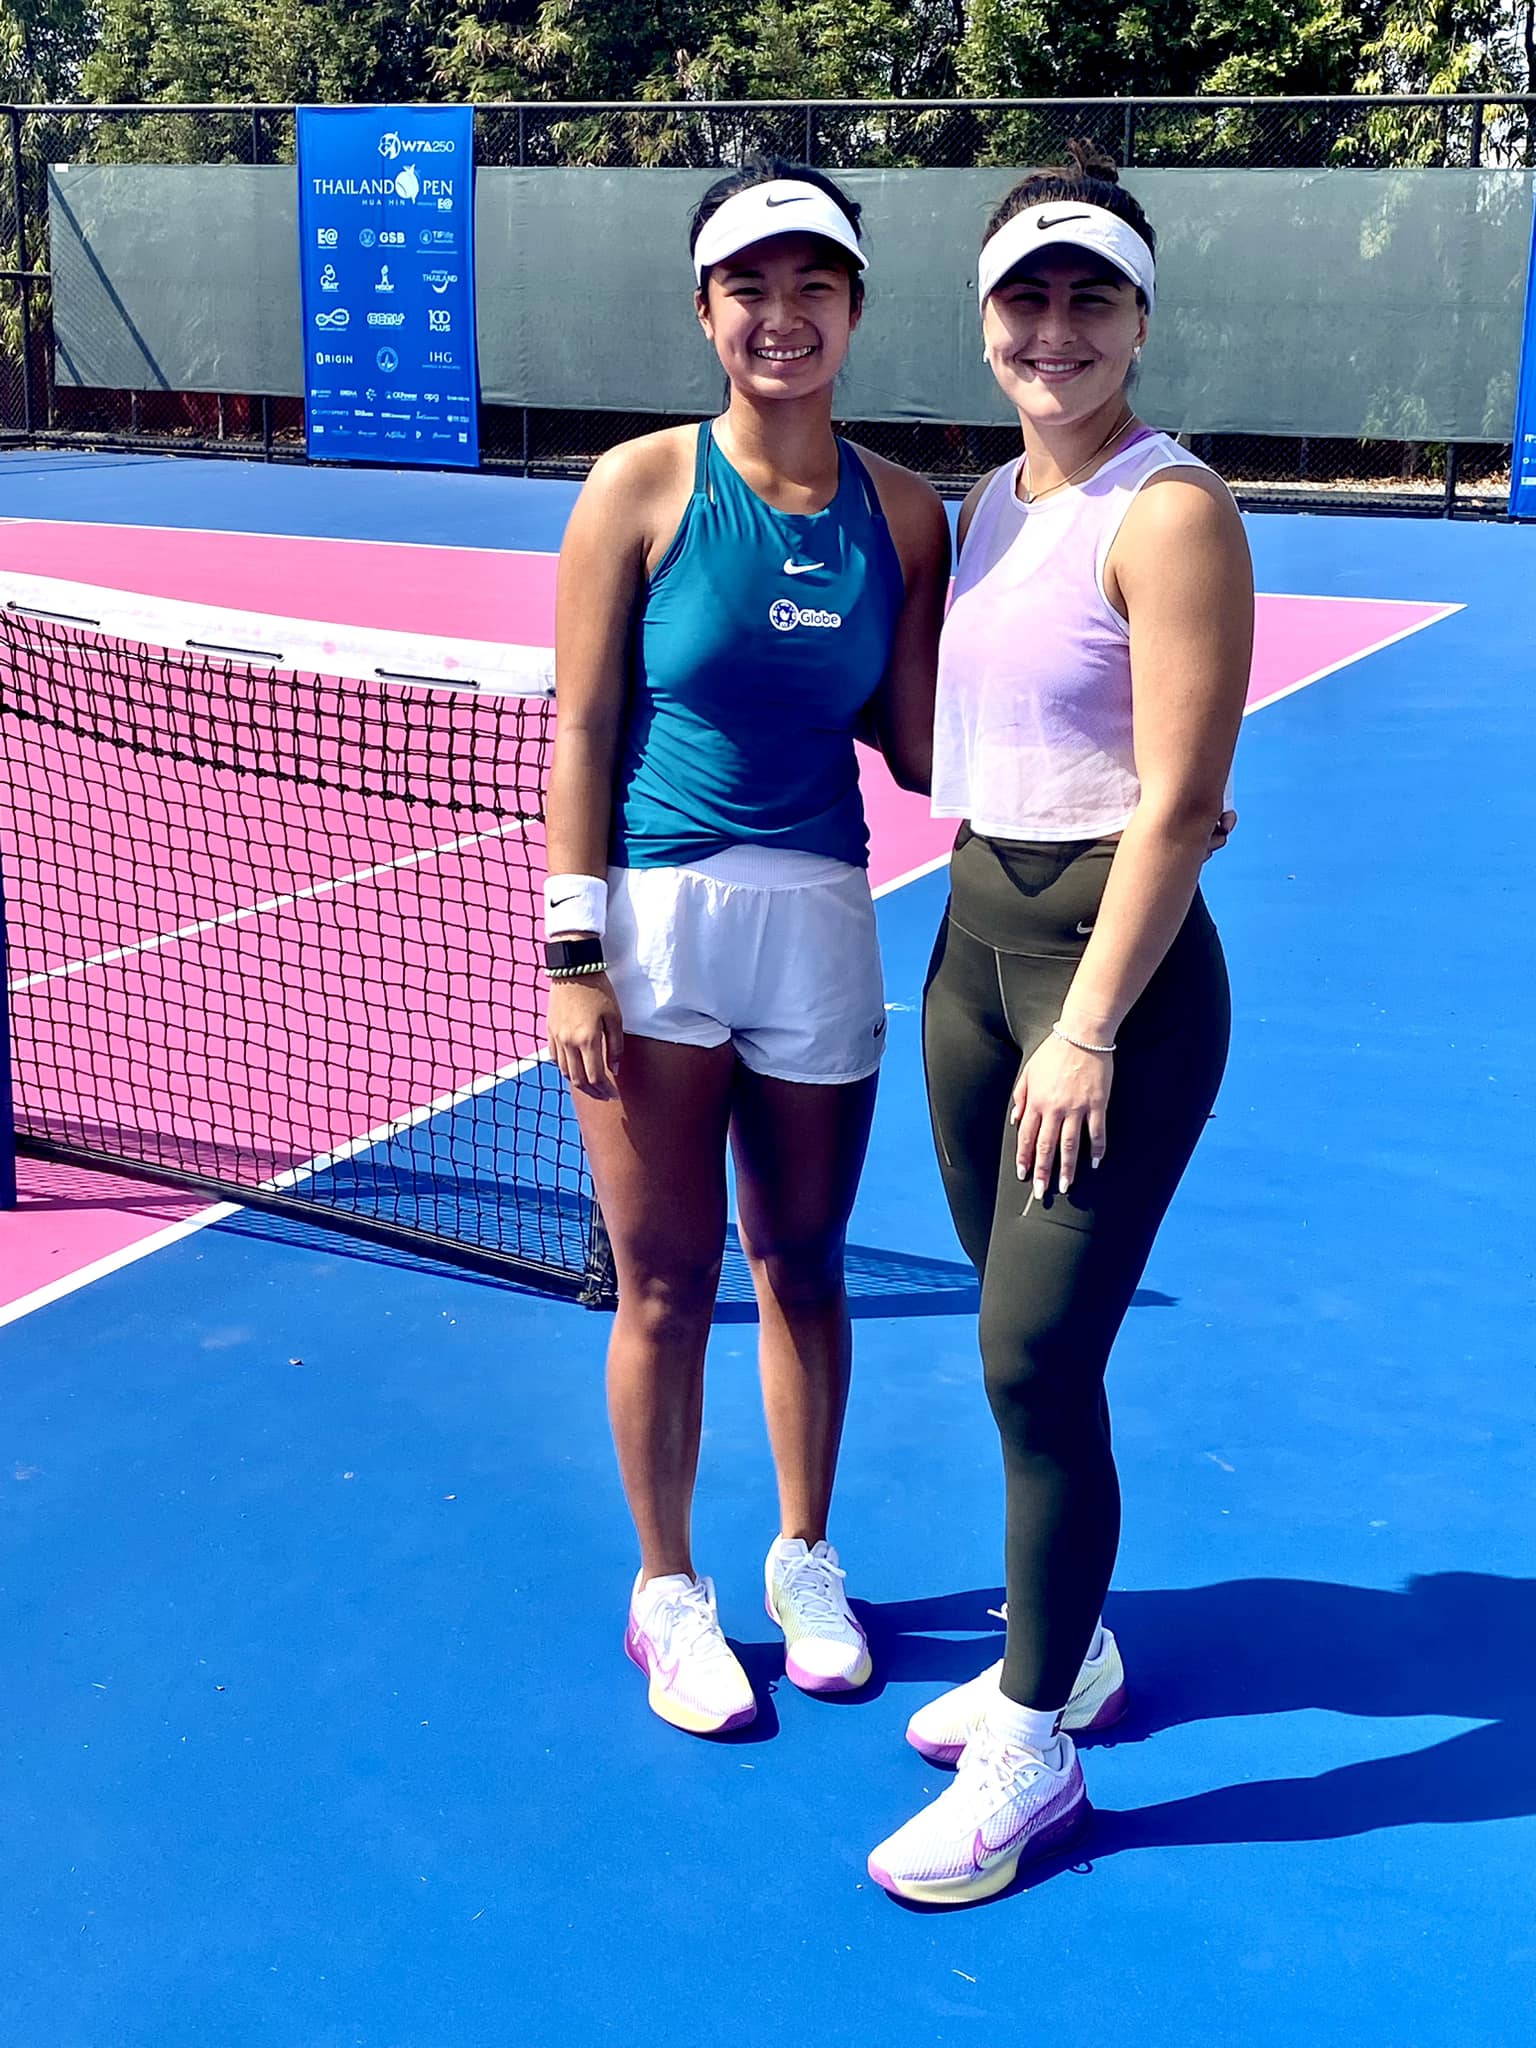 Alex Eala and Canadian professional player Bianca Andreescu during a training session in Thailand.  –Alex EalaFacebook